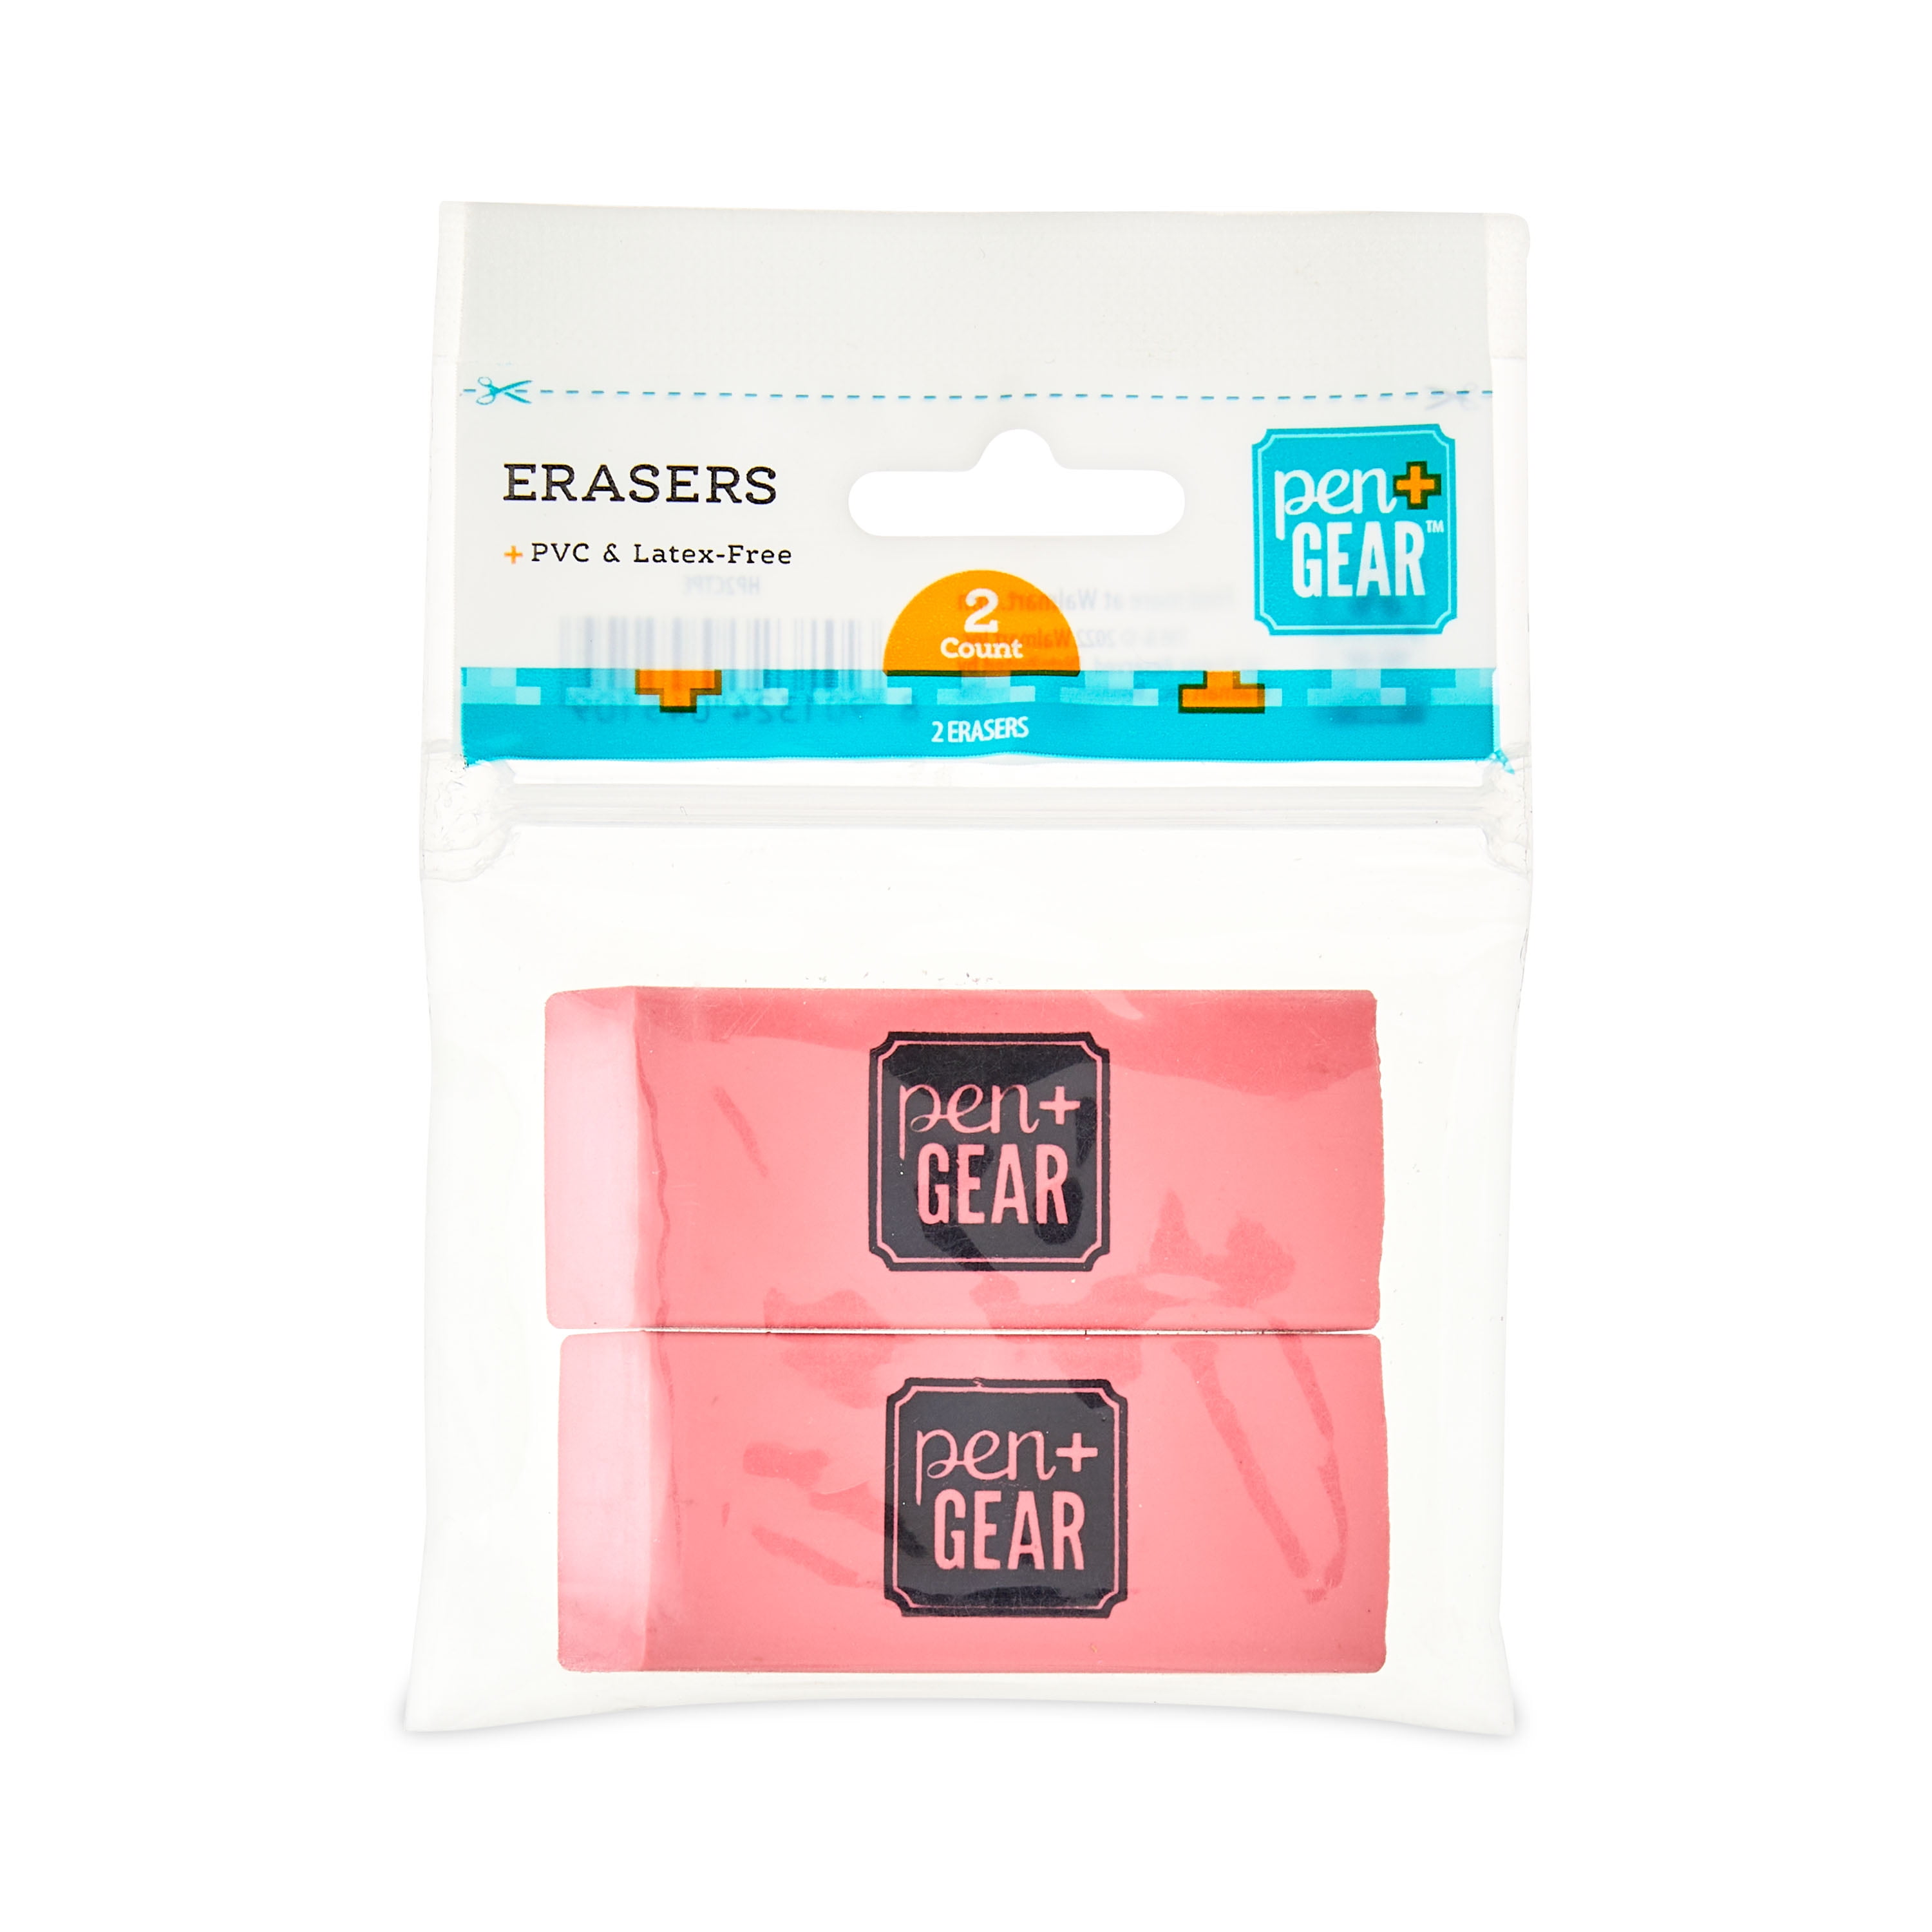 Pink + Gear Erasers, 2 Count